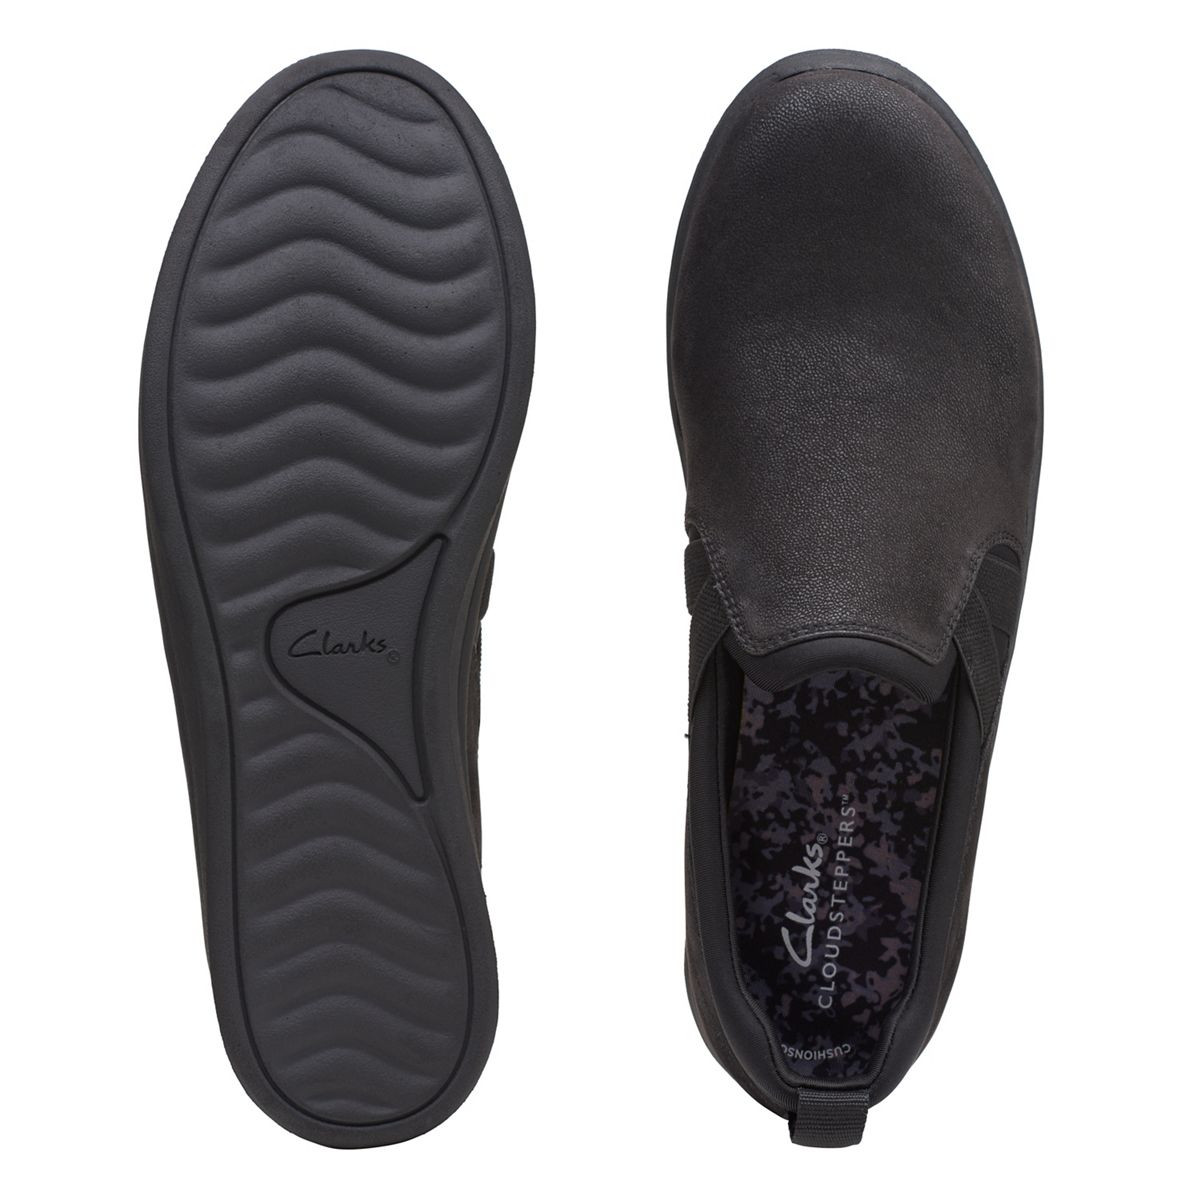 Bali Black Clarks Canada Official Site Shoes